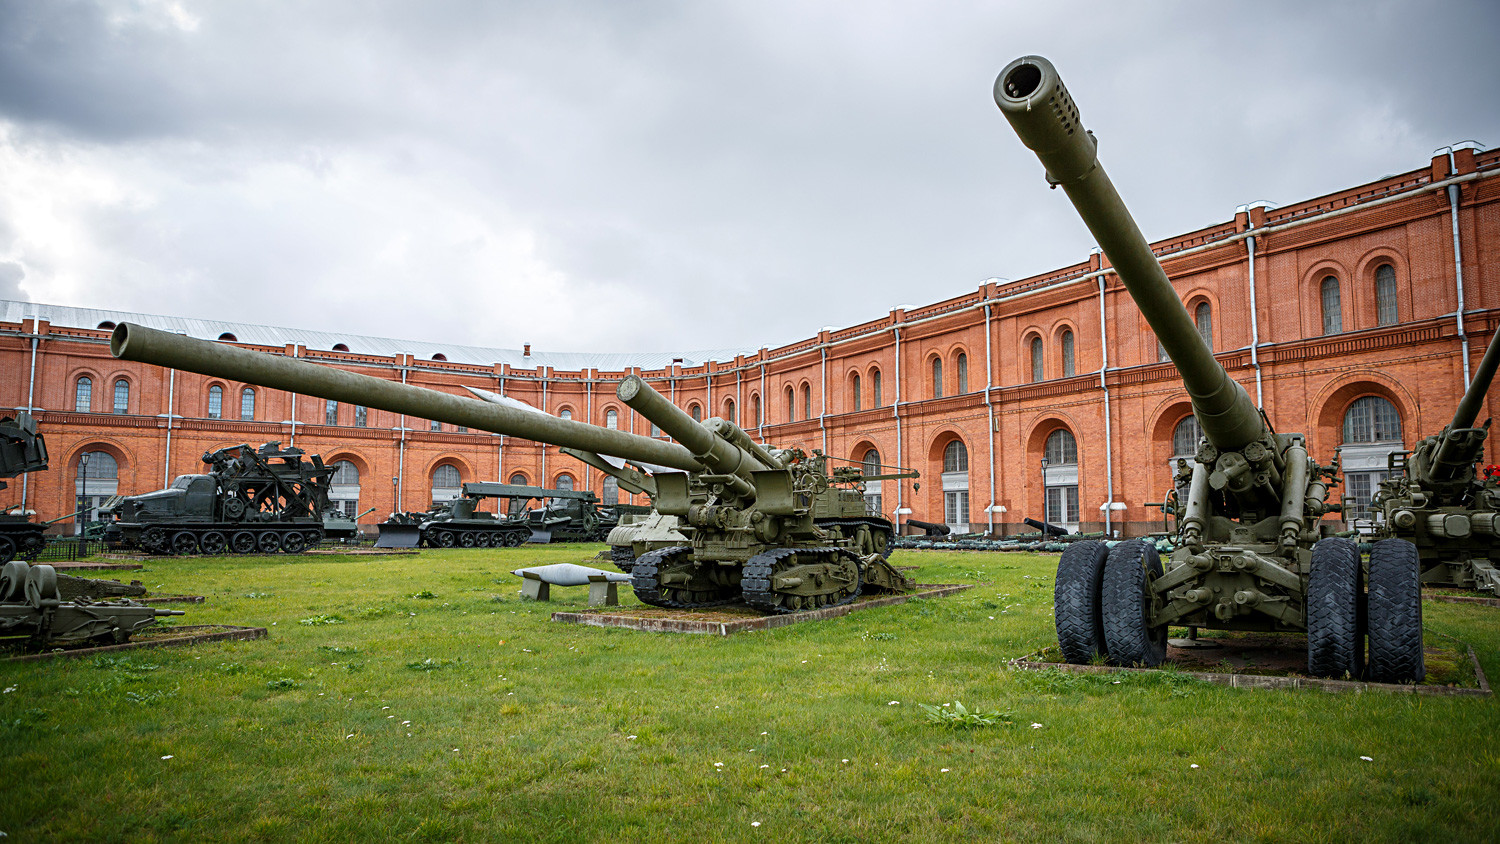 The Military-Historical Museum of the Artillery, Engineer Corps, and Signal Corps